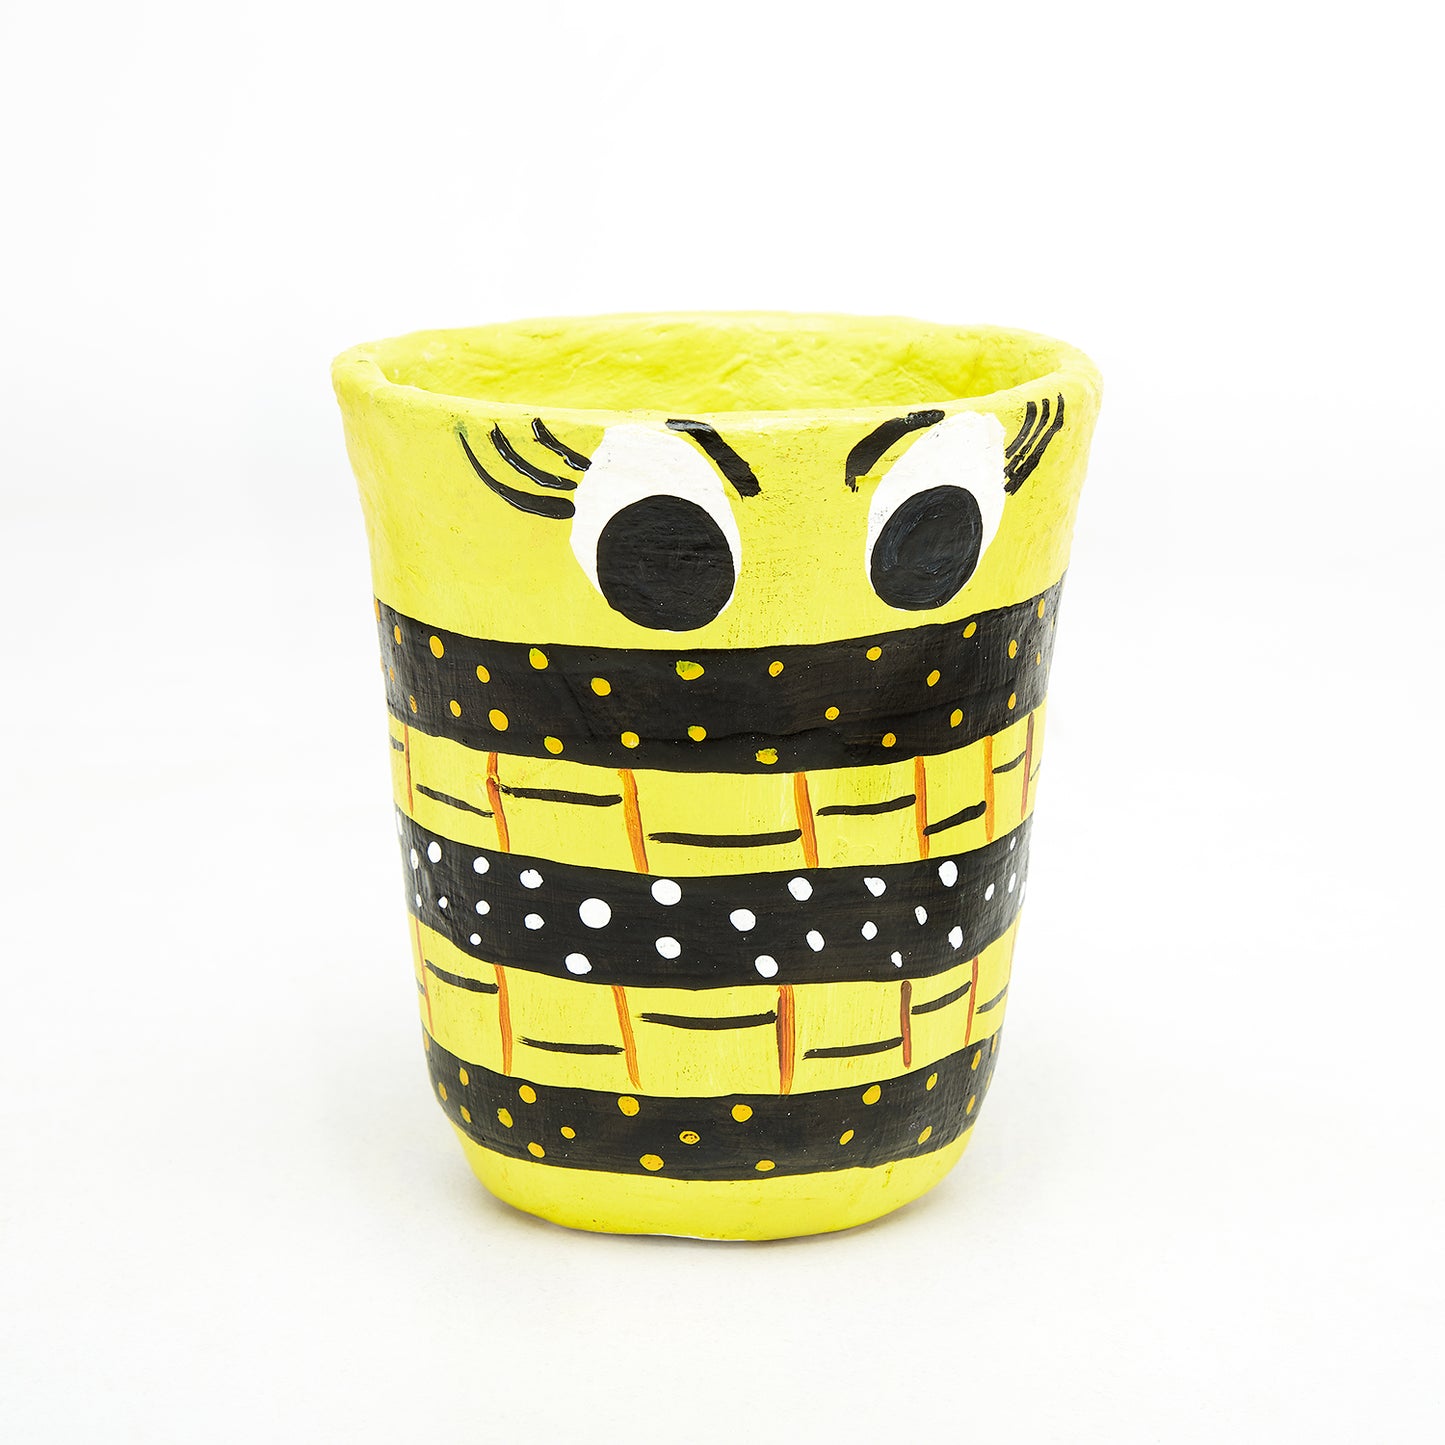 Canary Yellow & Coal Black with Honeybee - Paper Mache Planter